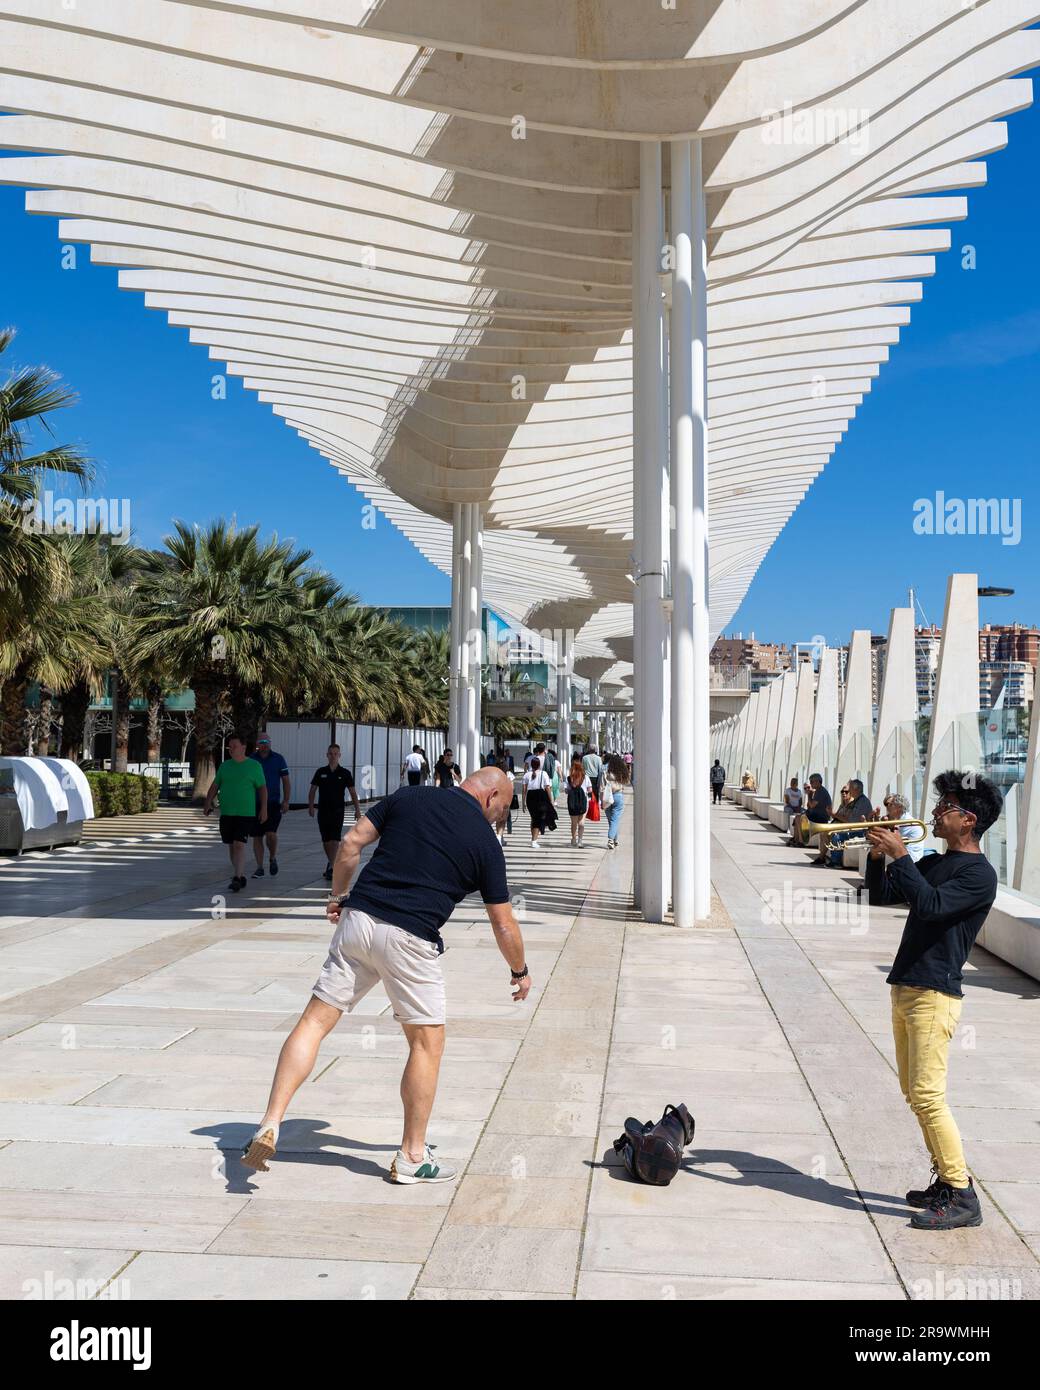 A street artist playing at the Promenade ( Paseo) Muelle Uno, Malaga, Spain Stock Photo